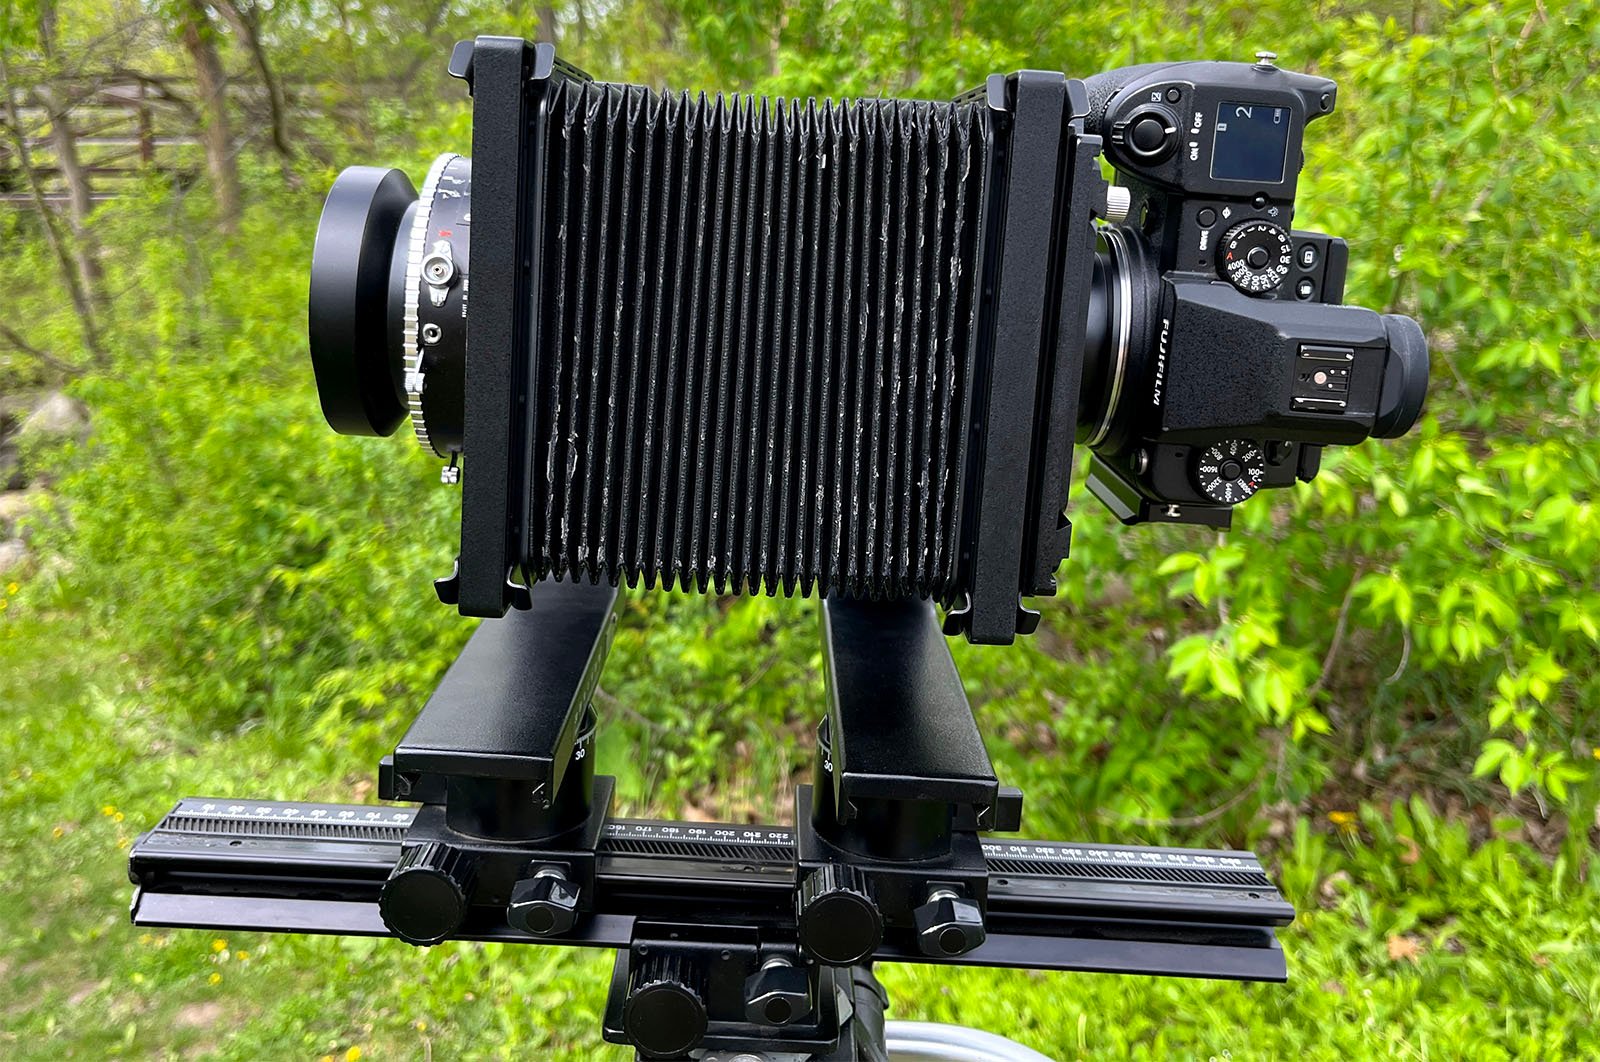 A large format camera mounted on a tripod, featuring a bellows and a lens facing a lush green outdoor backdrop.